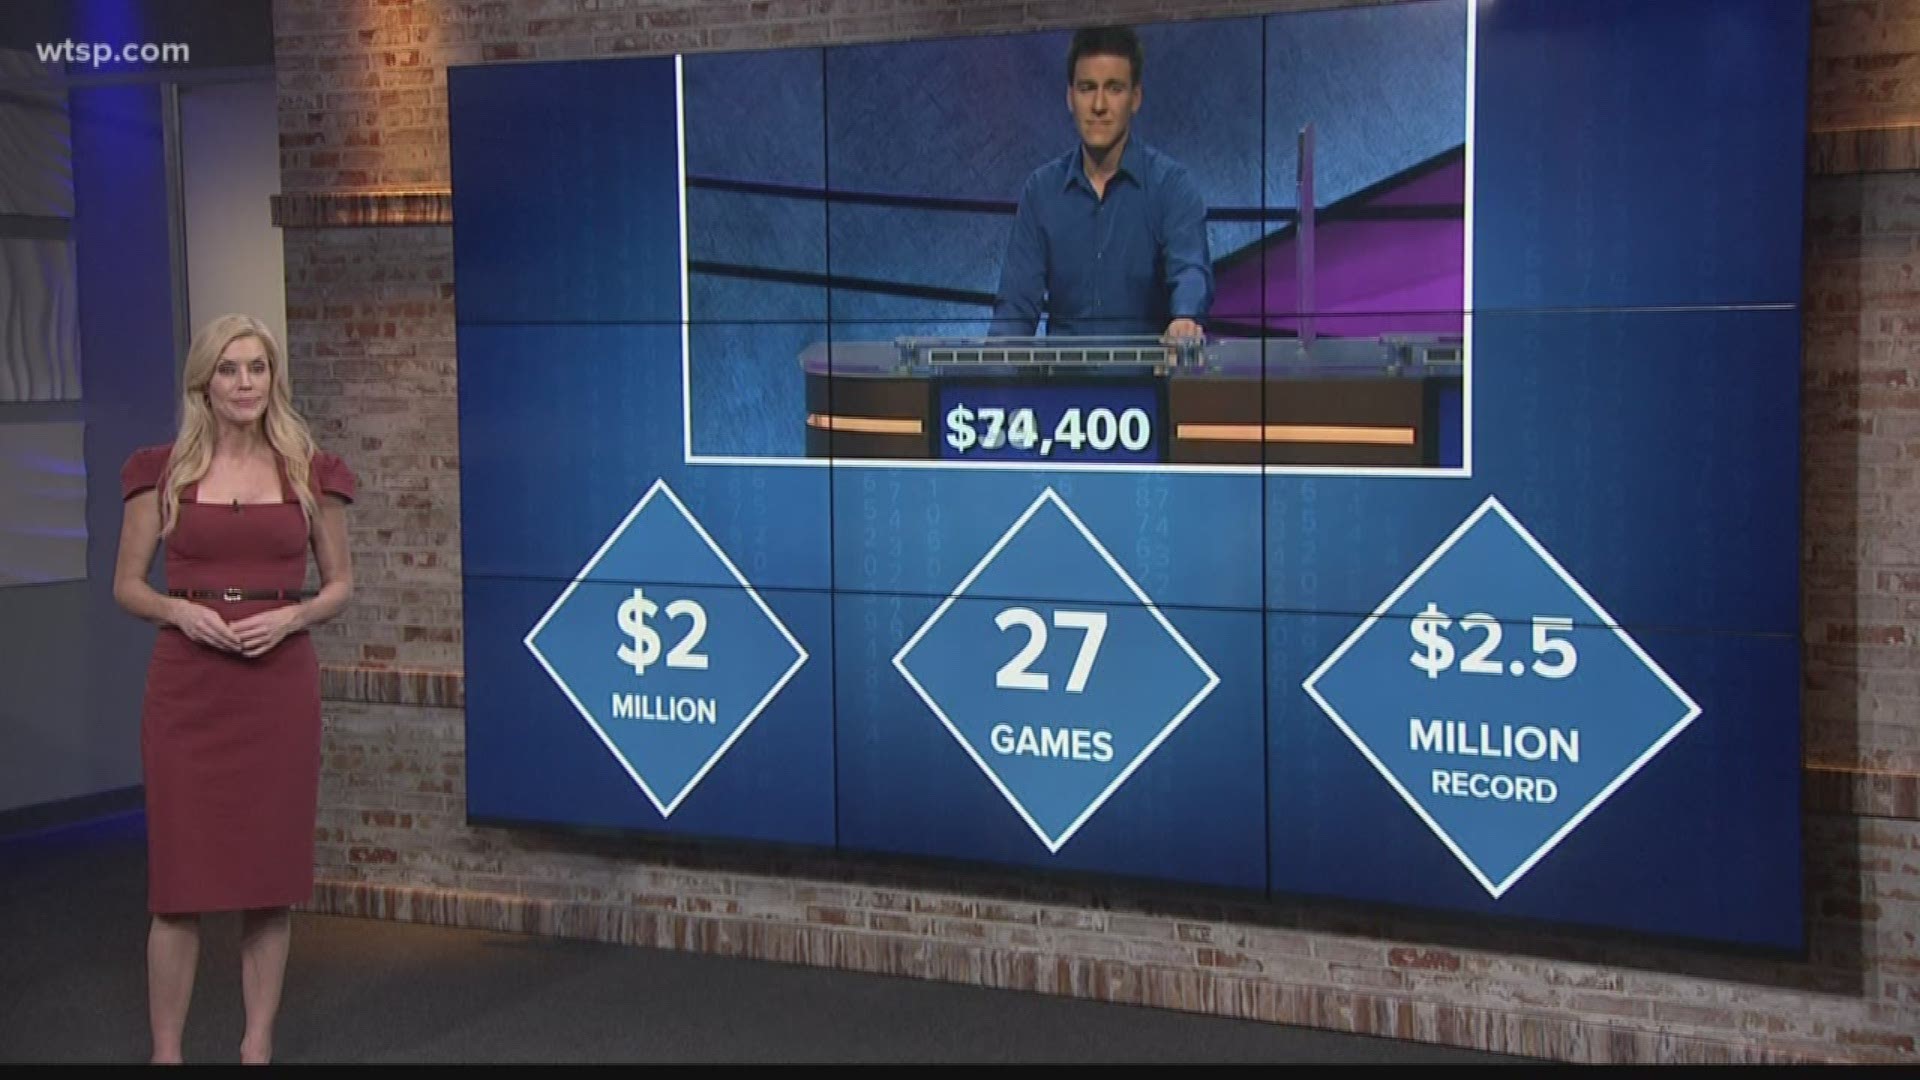 James Holzhauer broke the monetary milestone on his 27th day on the show. He still has a way to go to top the record, which is $2.5 million.